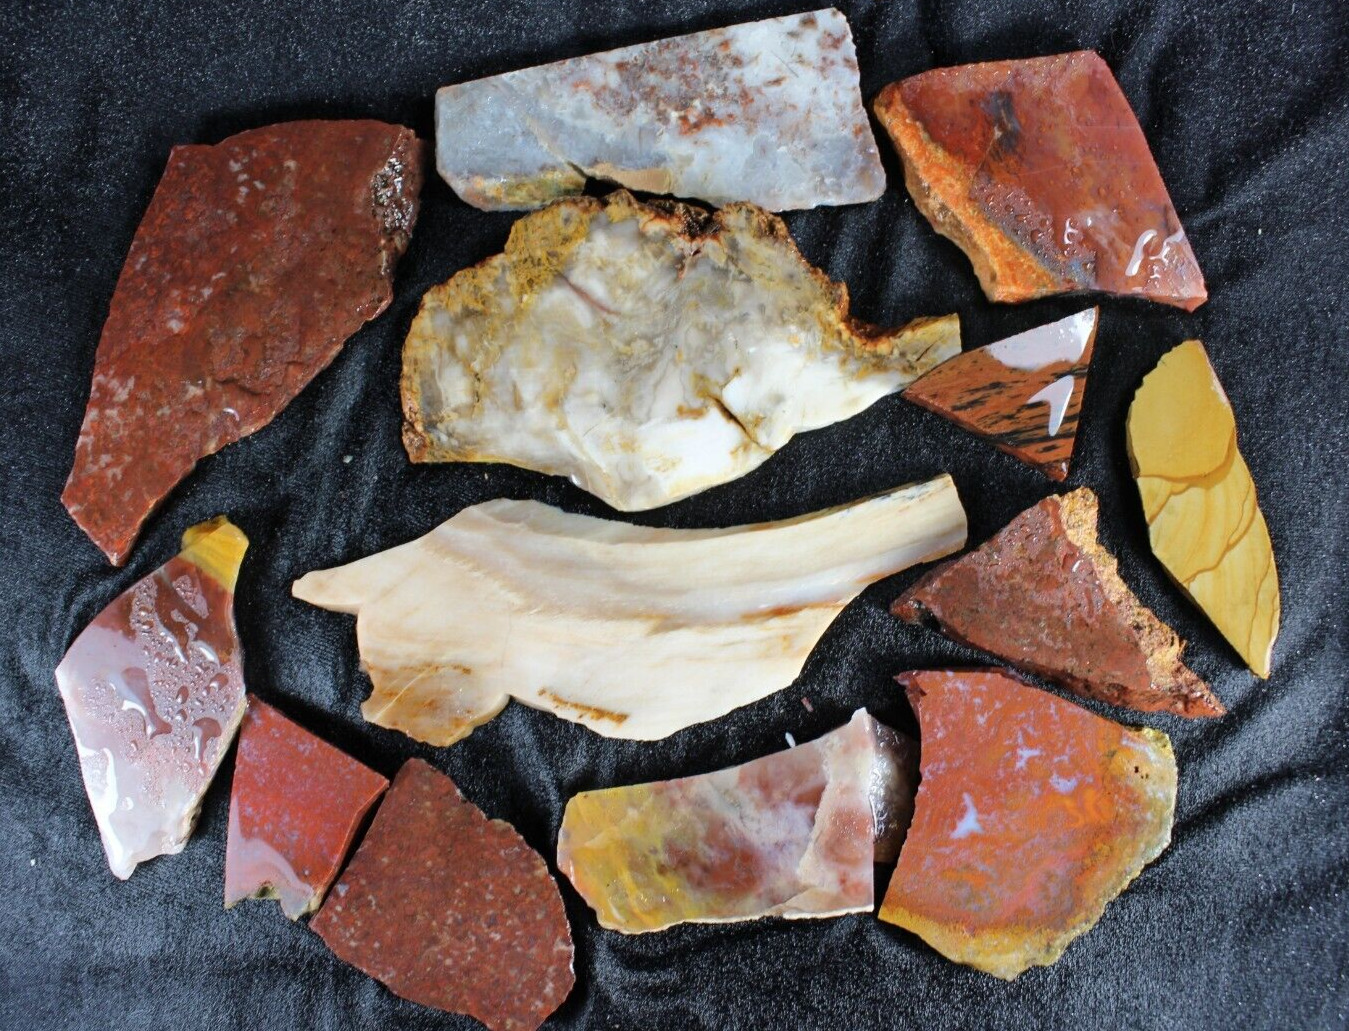 PJ: Mixed Lot of Slabs - Jasper, Agate and More   15 Ozs